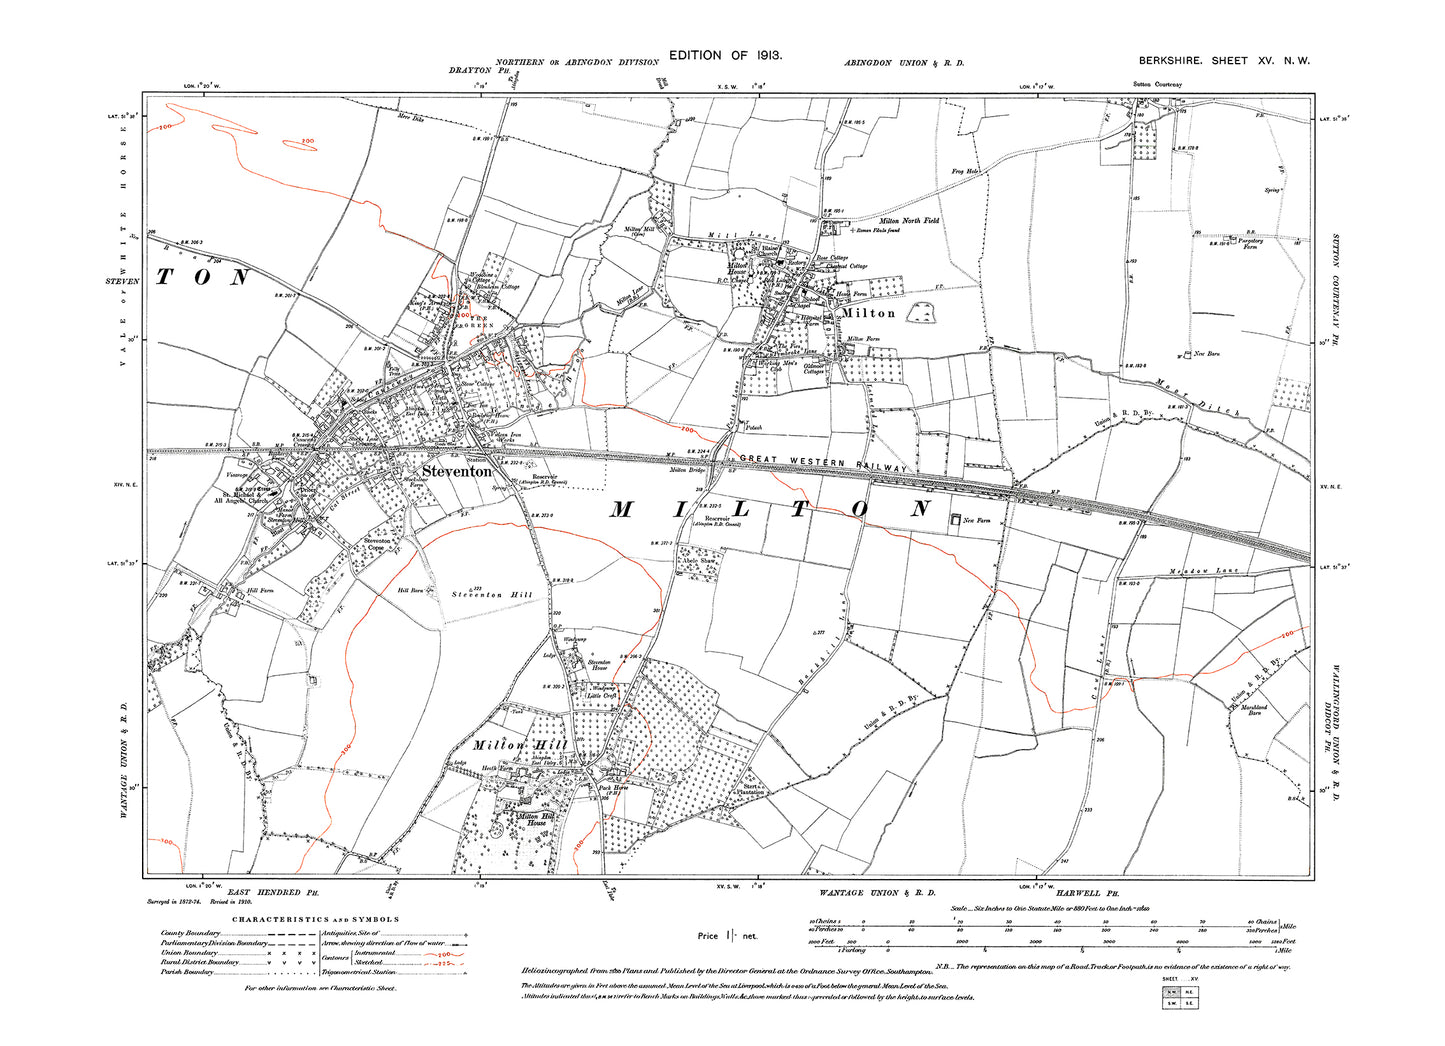 A 1913 map showing Steventon, Milton, Milton Hill in Berkshire - OS 1:10560 scale map, Berks 15NW